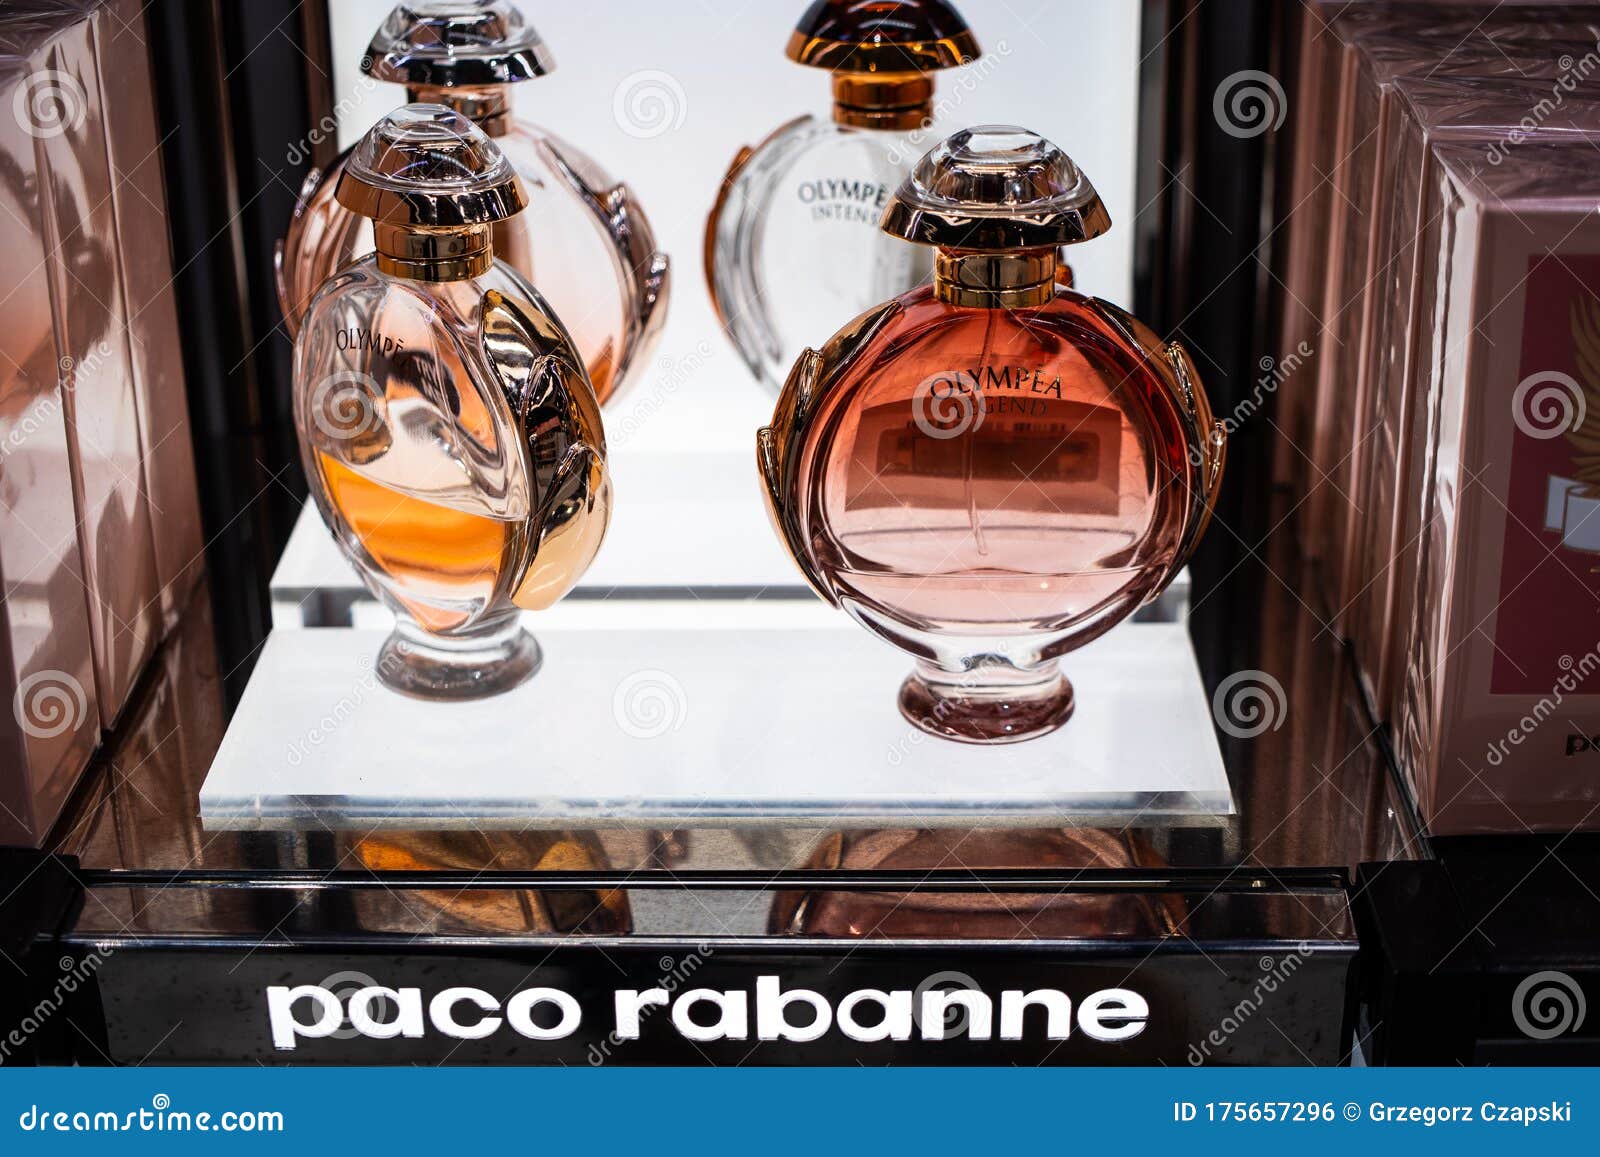 Paco Rabanne Perfume on the Shop Display for Sale, Fragrance Created by ...